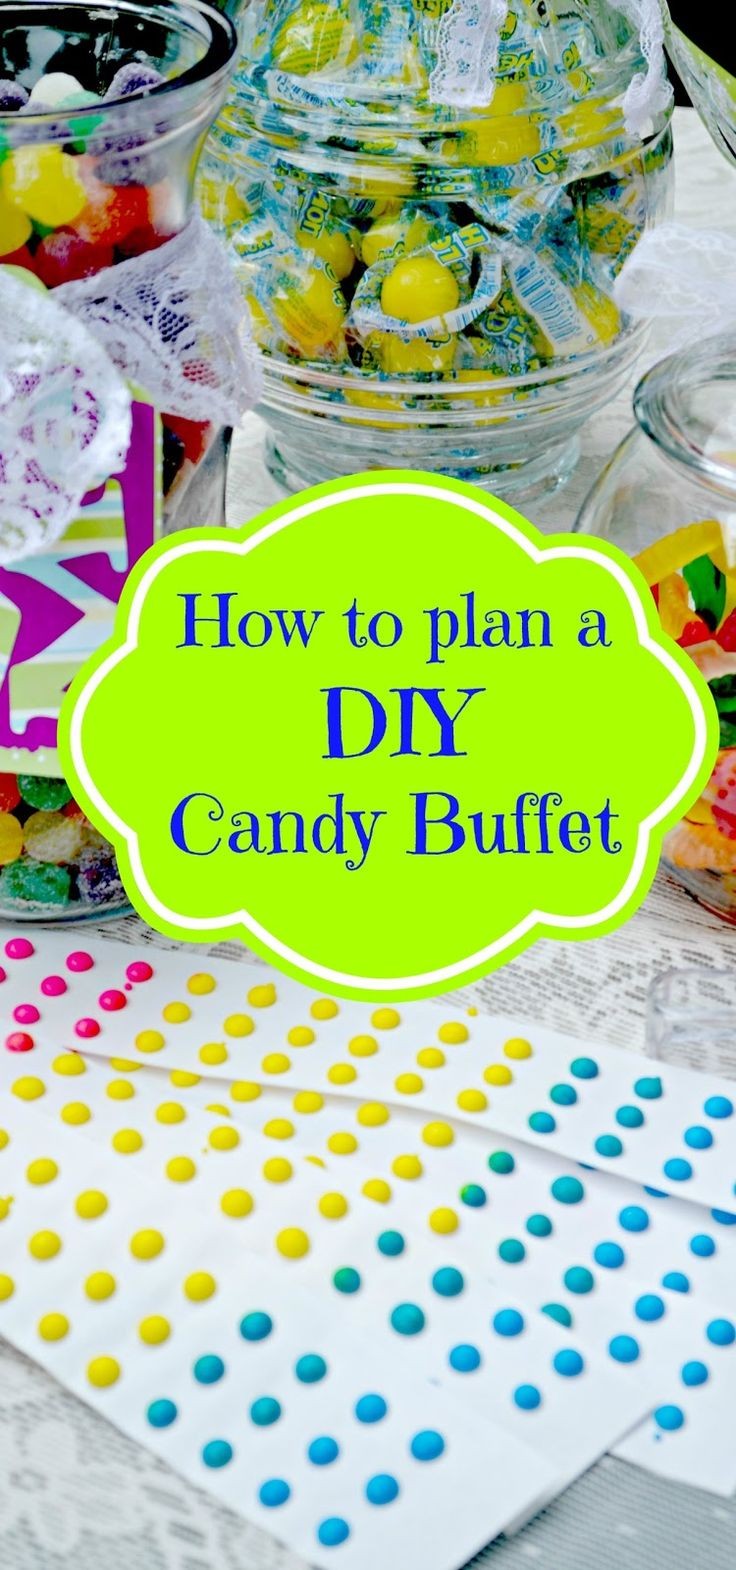 How to Plan a DIY Candy Buffet for Your Party, bir...